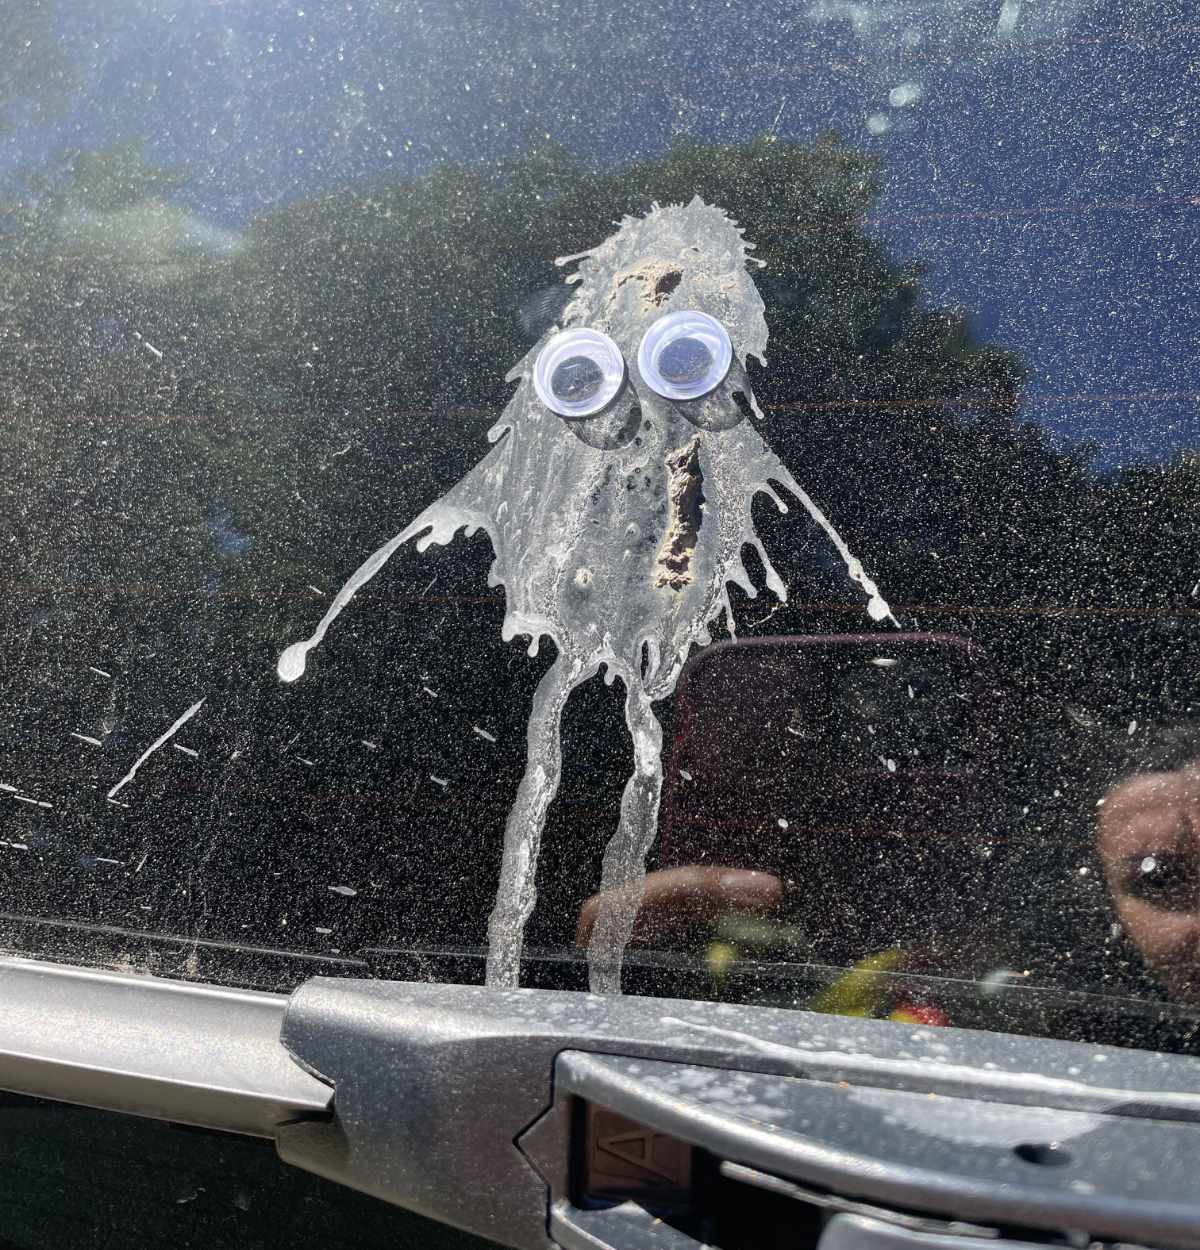 A bird pooped on my car in the shape of a monster so I put googly eyes on it